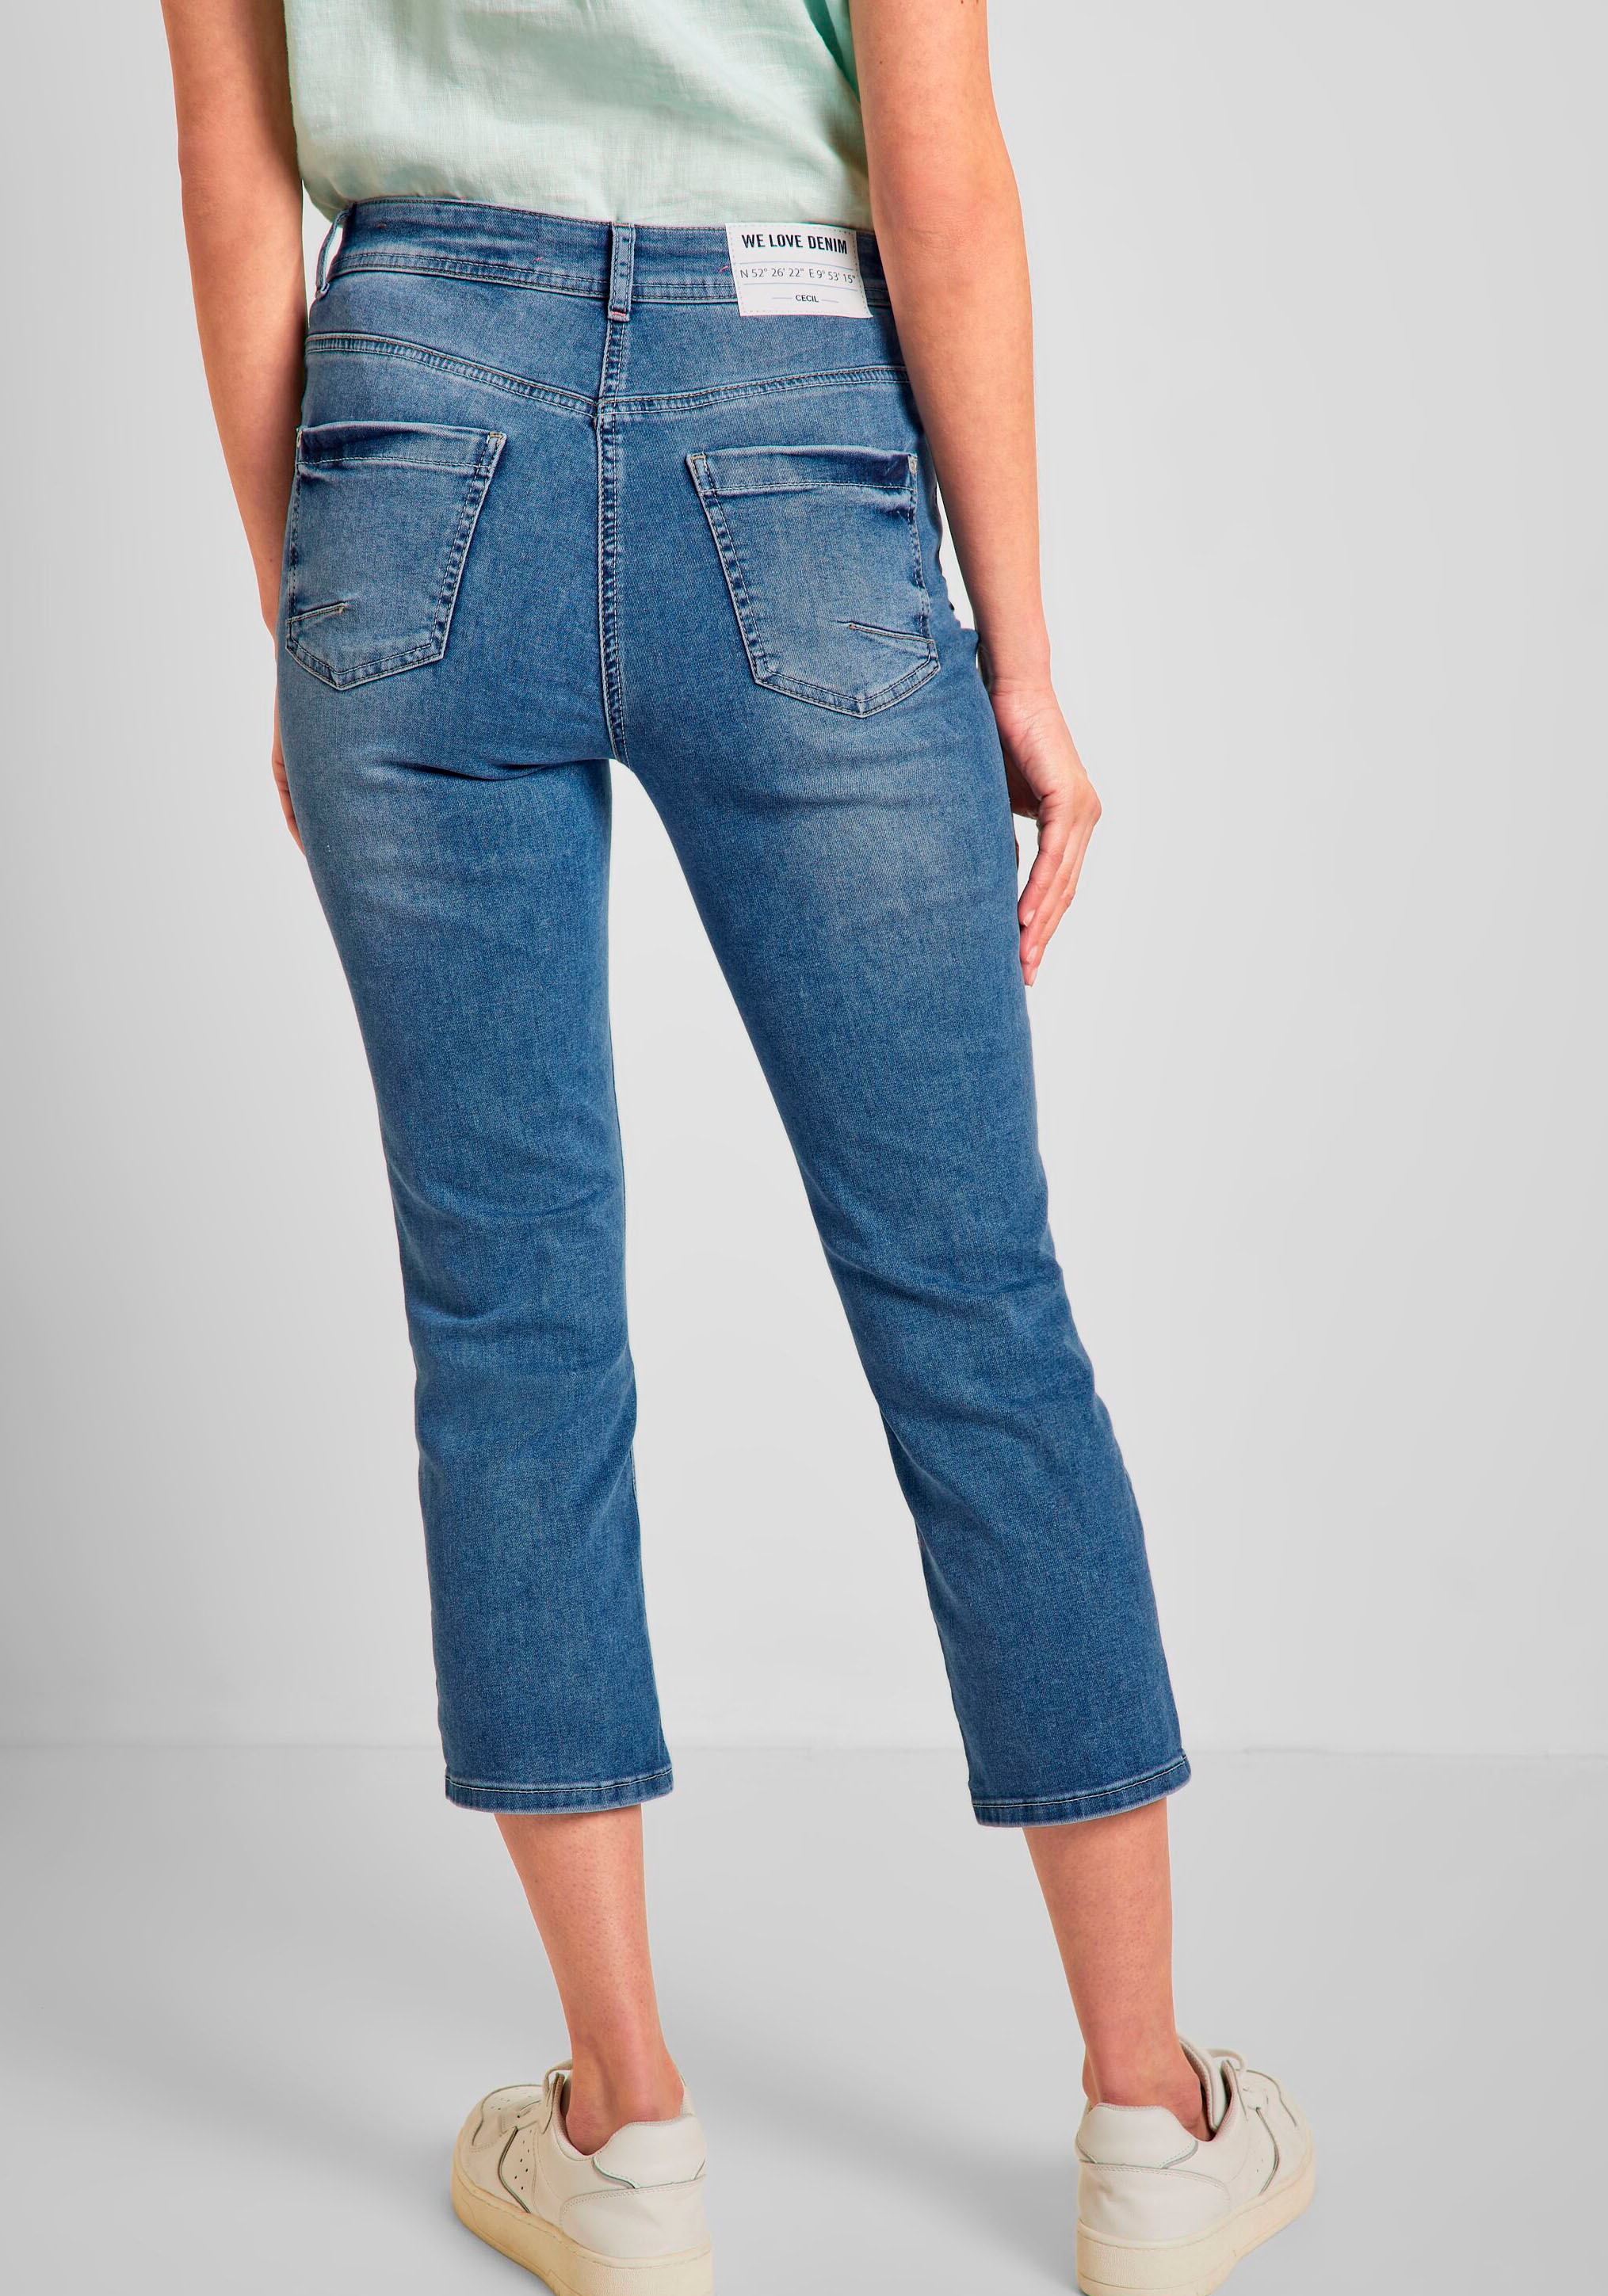 bei im 5-Pocket-Style 7/8-Jeans, OTTO Cecil